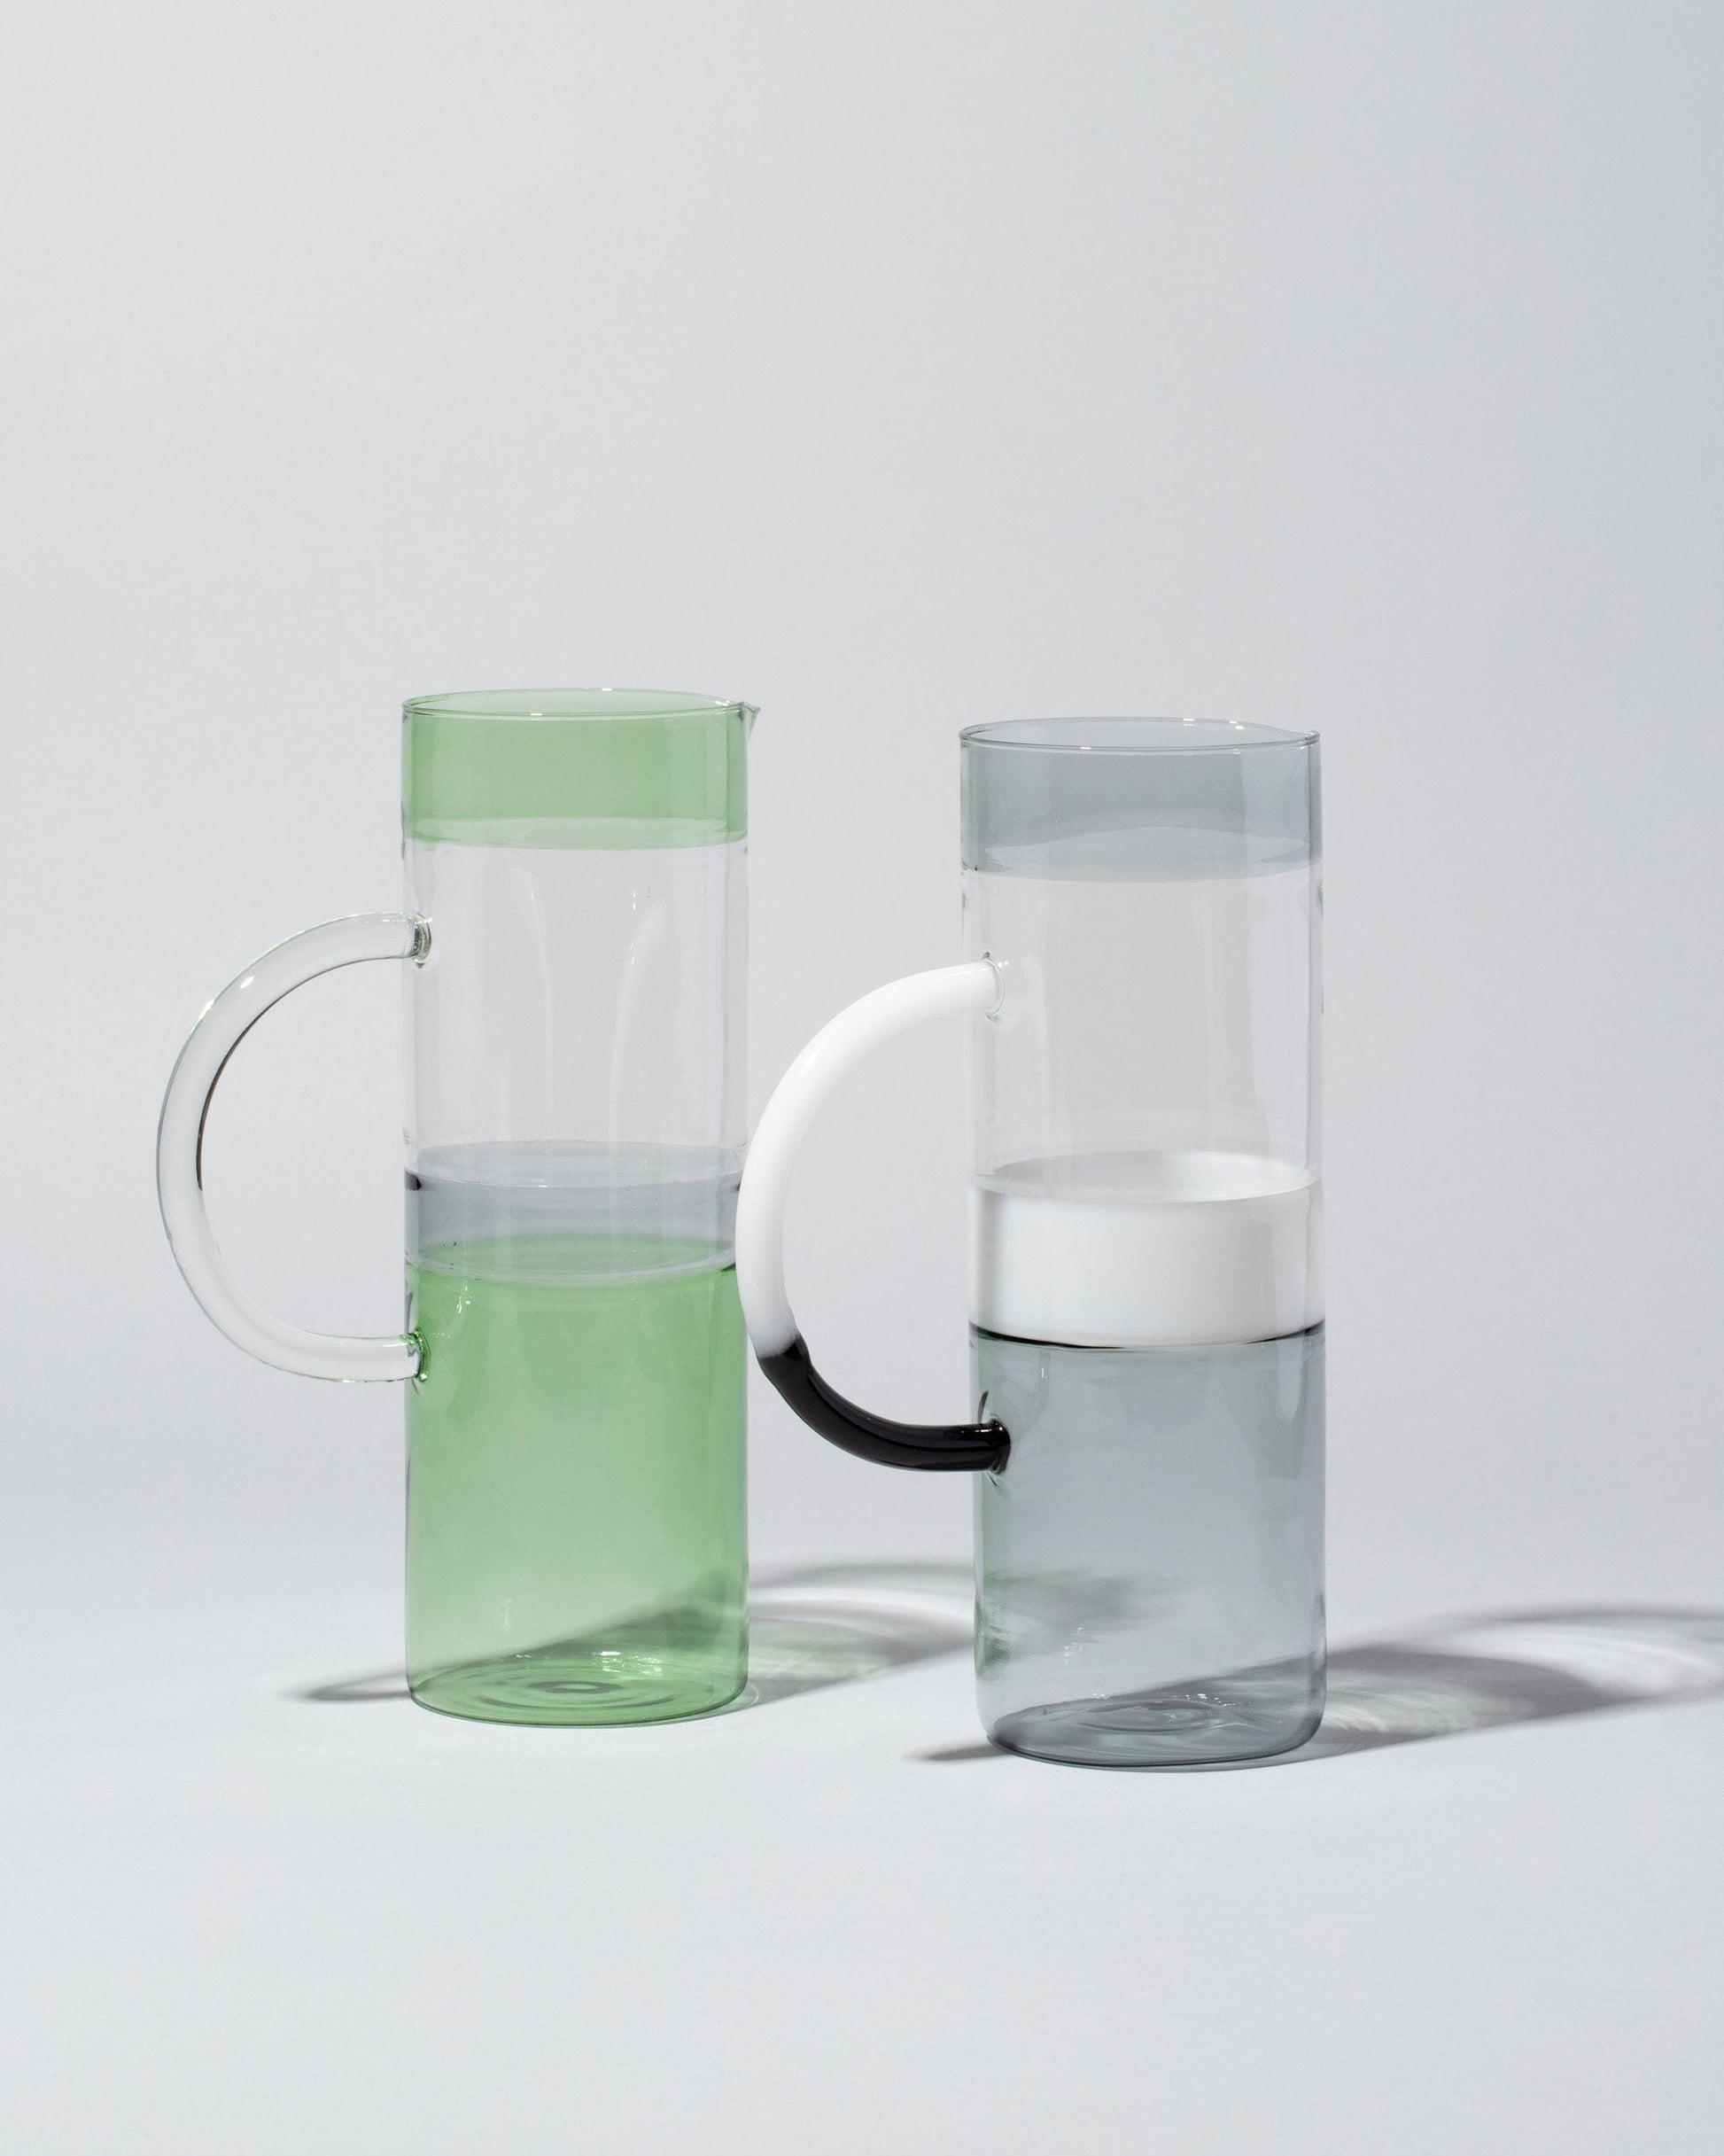 Group of Ichendorf Milano Smoke/White/Clear and Green/Smoke/Clear Tequila Sunrise Jugs on light color background.